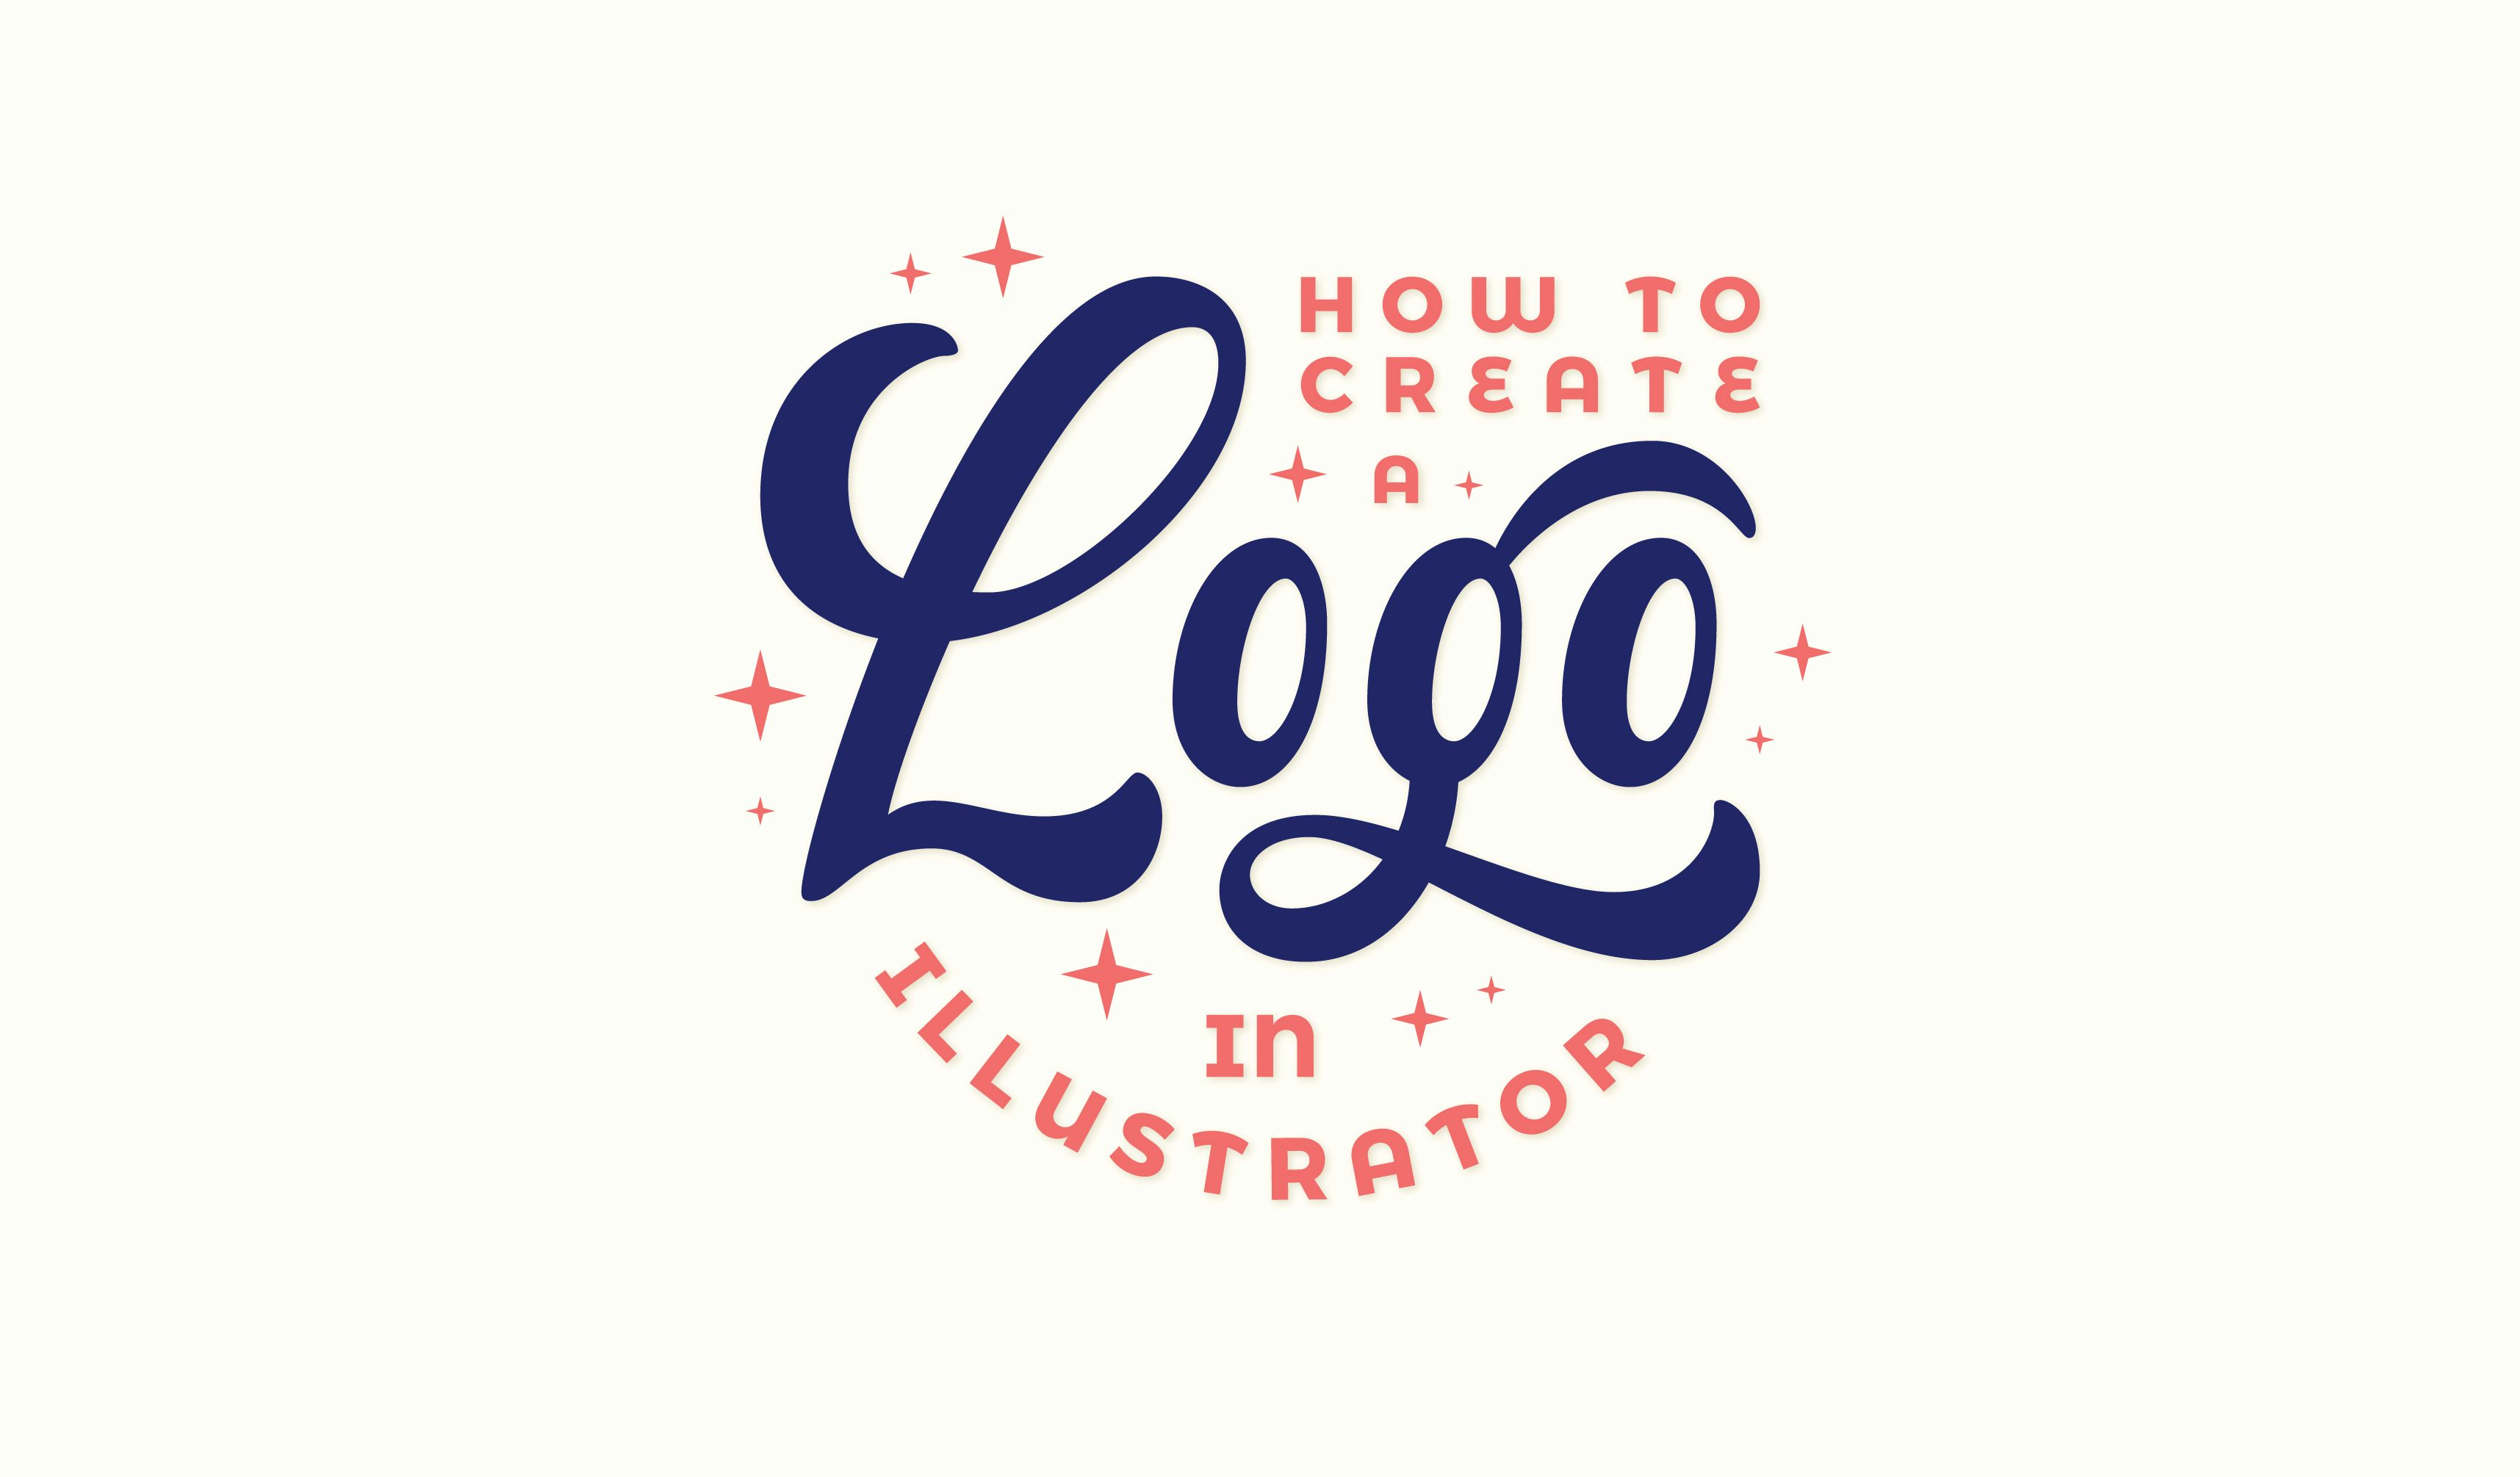 8 Simple Steps to Convert Hand Drawings into Vectors